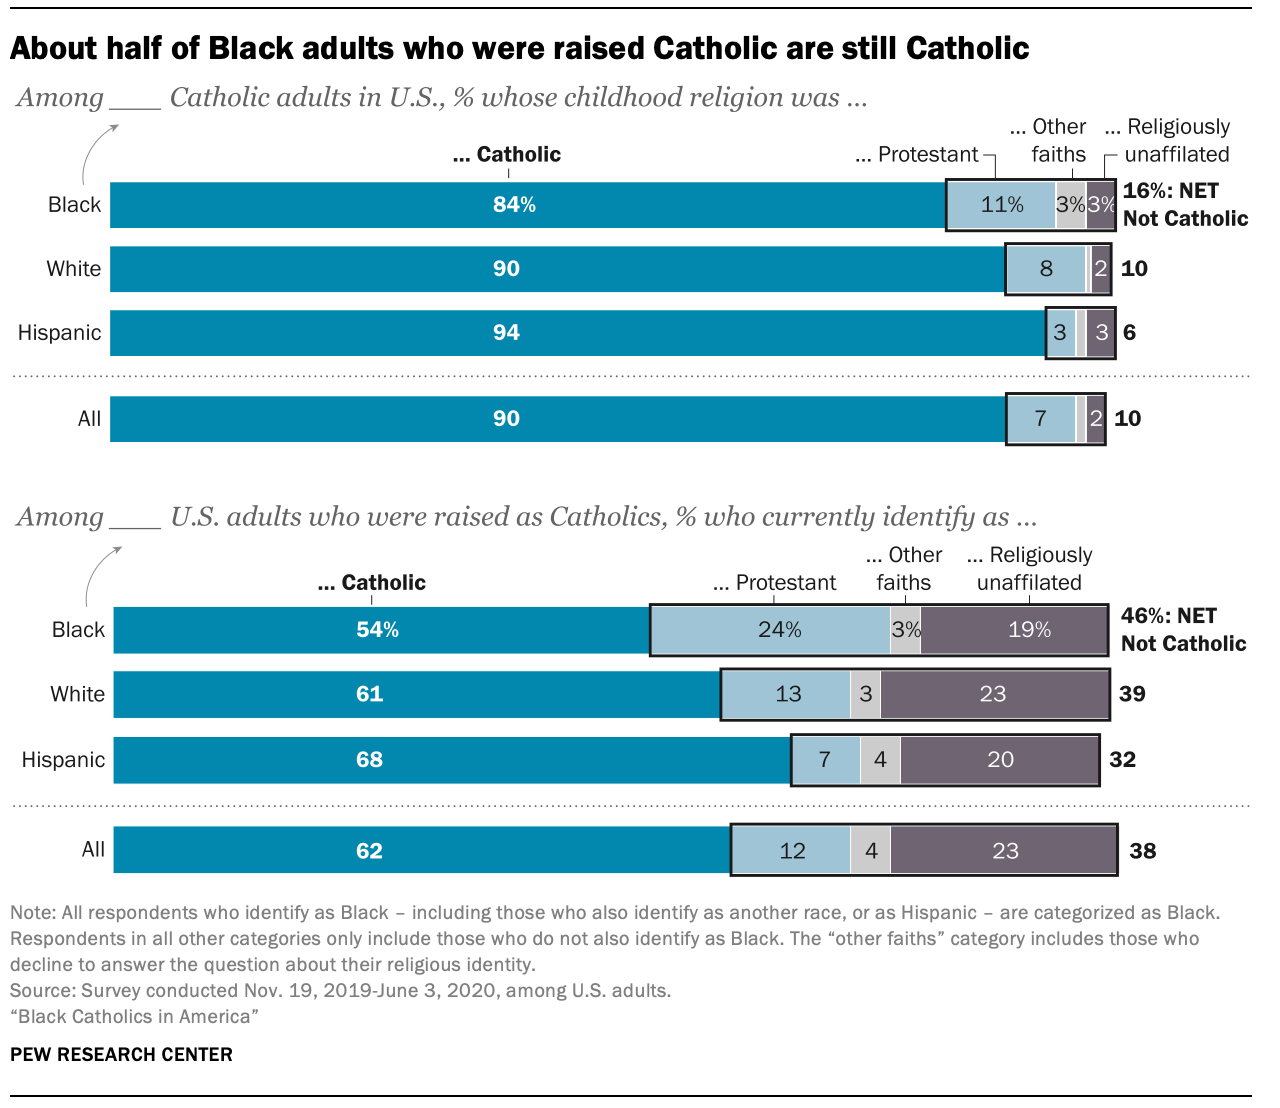 A chart showing about half of Black adults who were raised Catholic are still Catholic